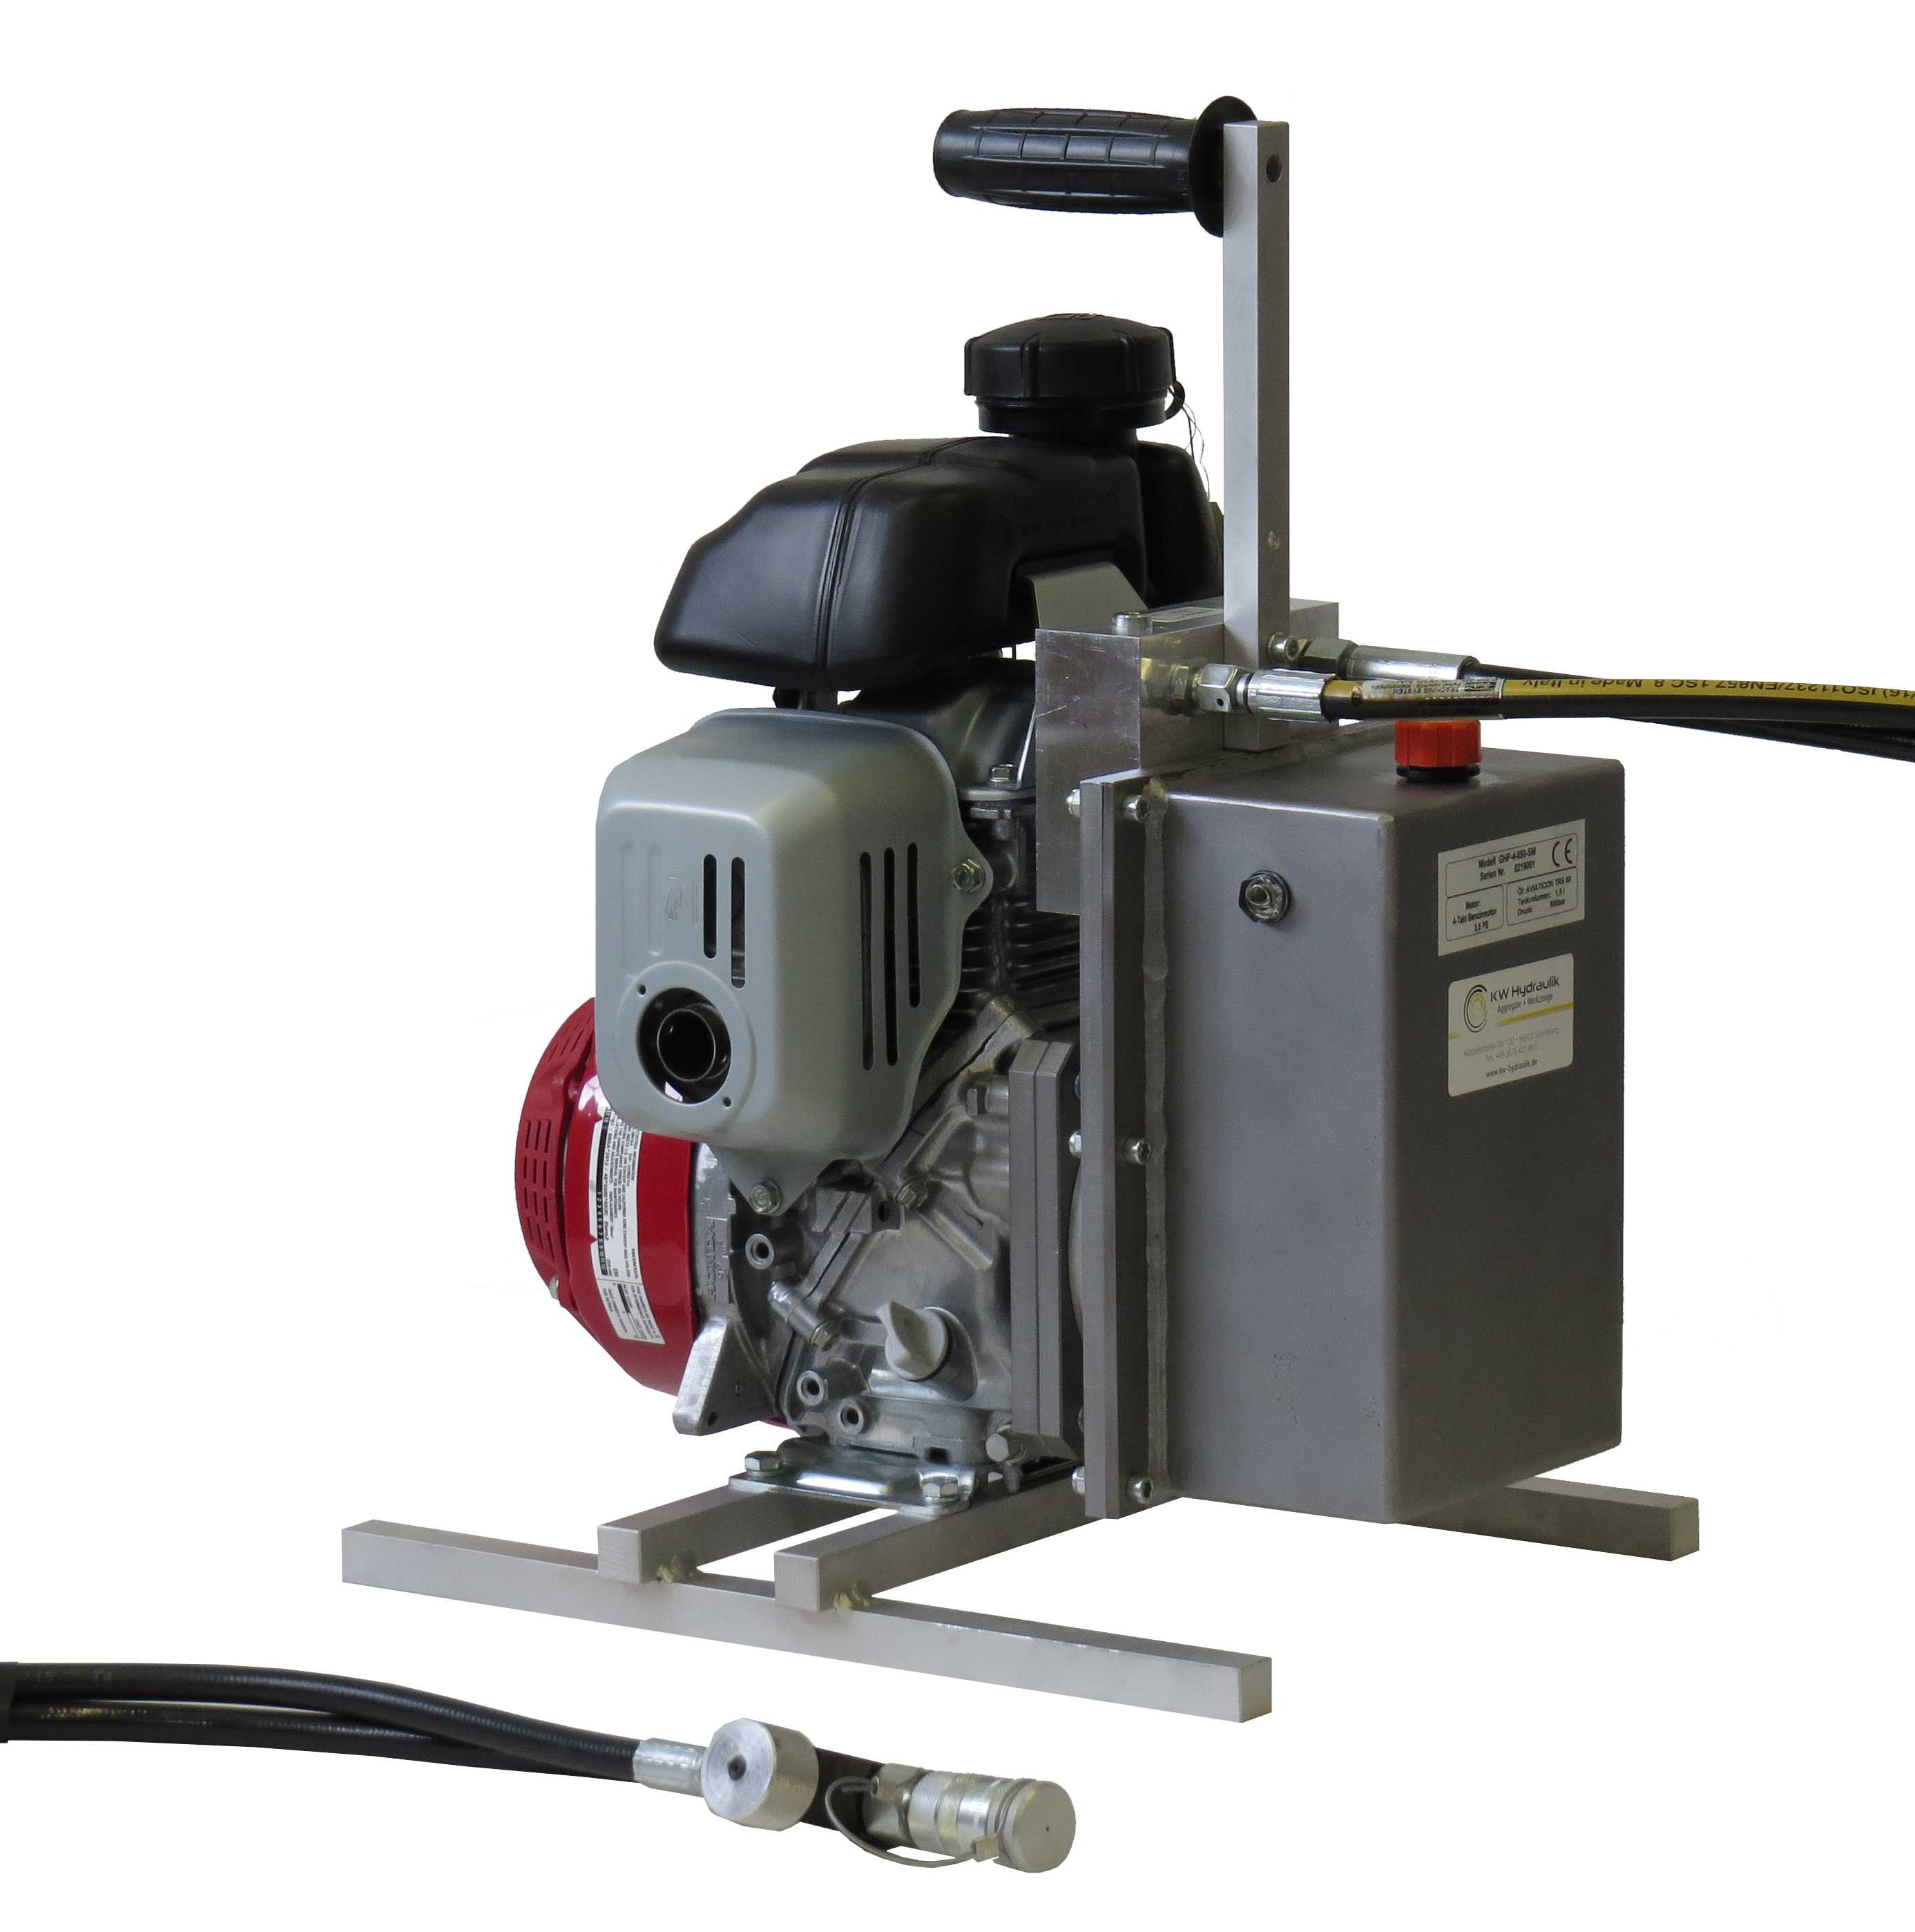 GHP-4-SM - Hydraulic power unit with gasoline engine for single acting tools